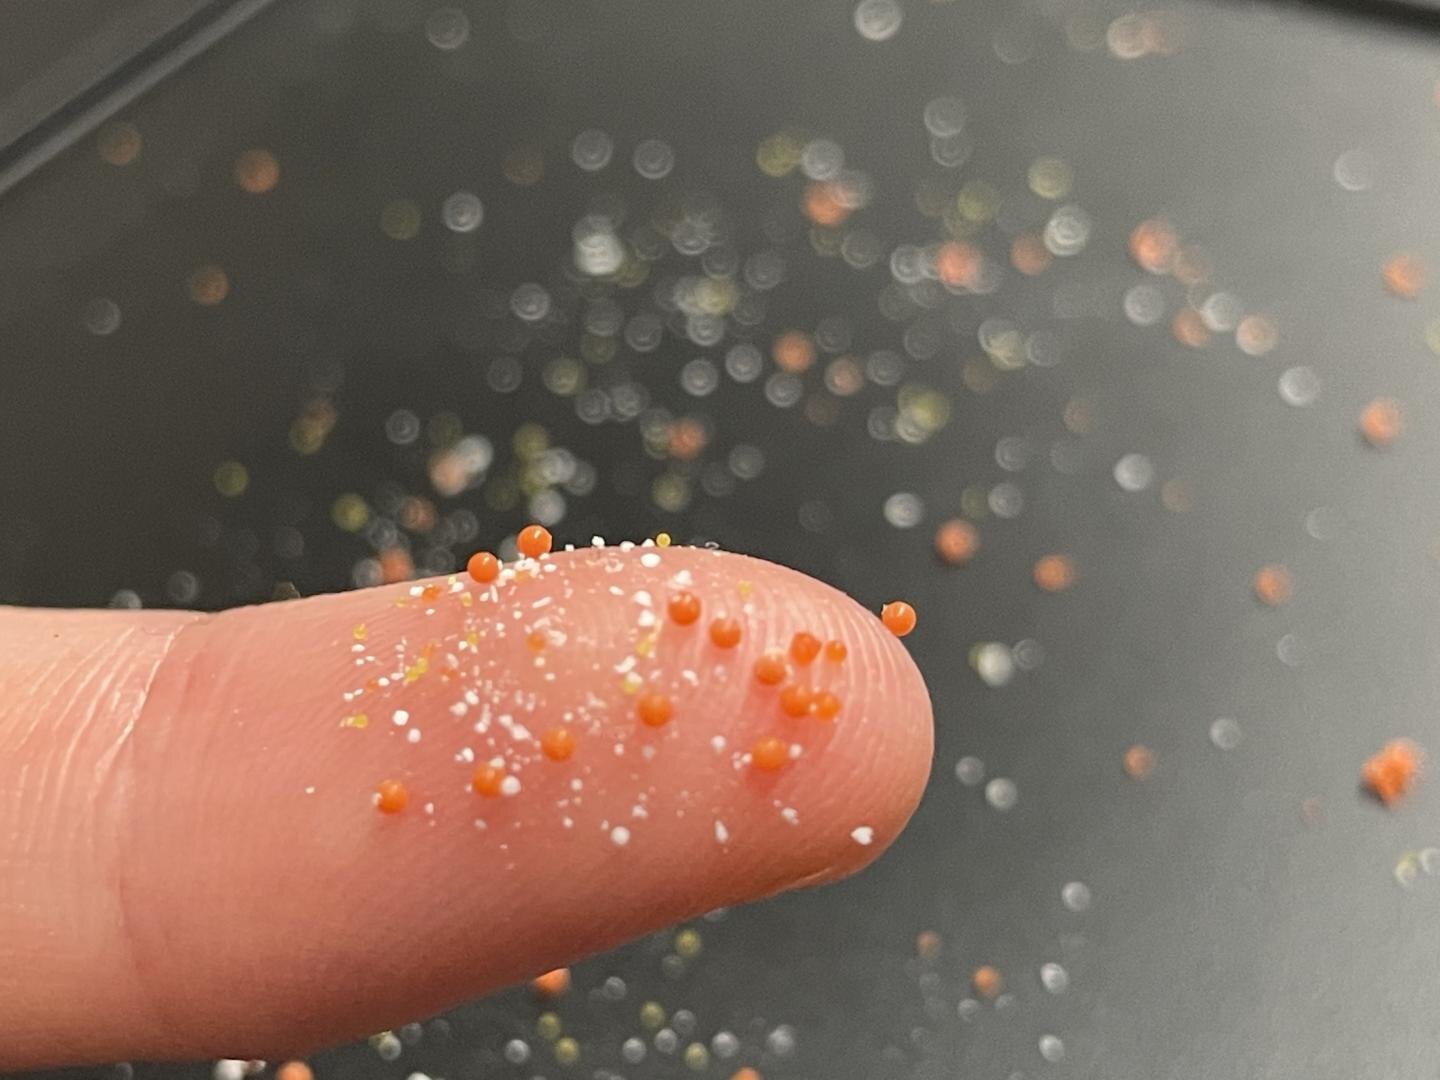 New study shows that microplastics are turning into ‘hubs’ for pathogens, antibiotic-resistant bacteria